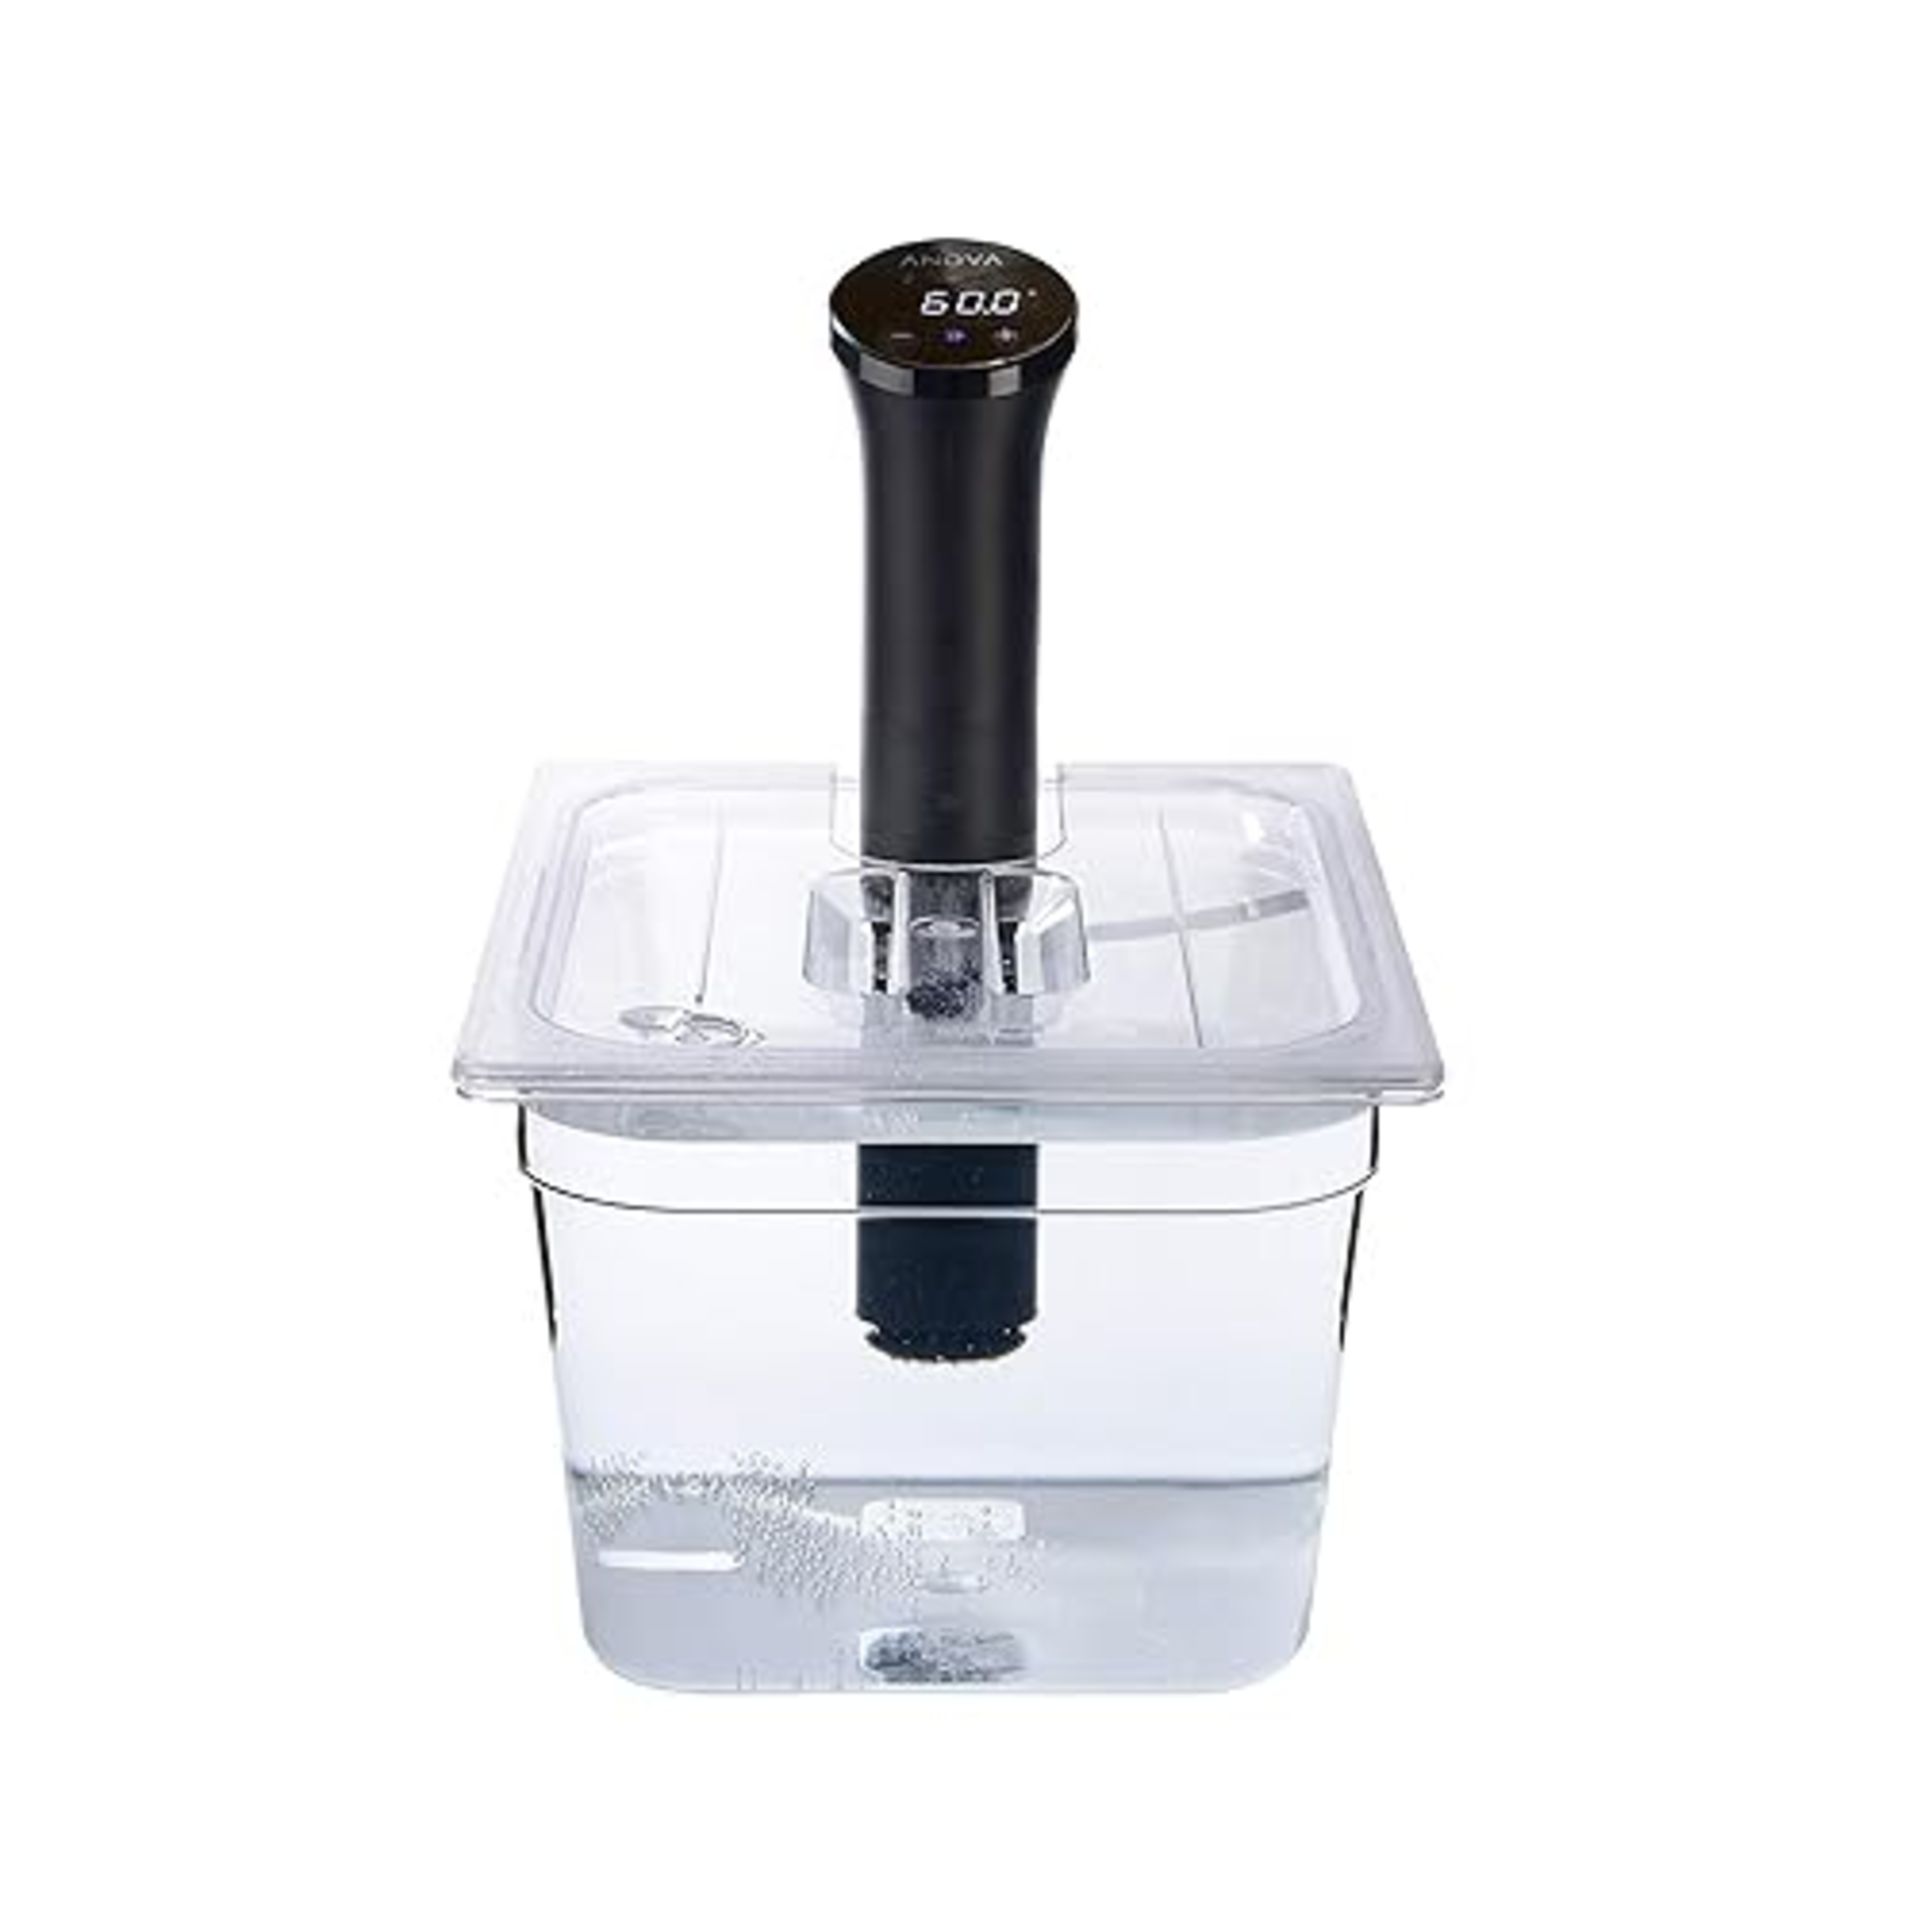 SousVideTools Polycarbonate Container - Custom Cut Lid to Suit the Anova Nano Sous Vide Cooker - Cl